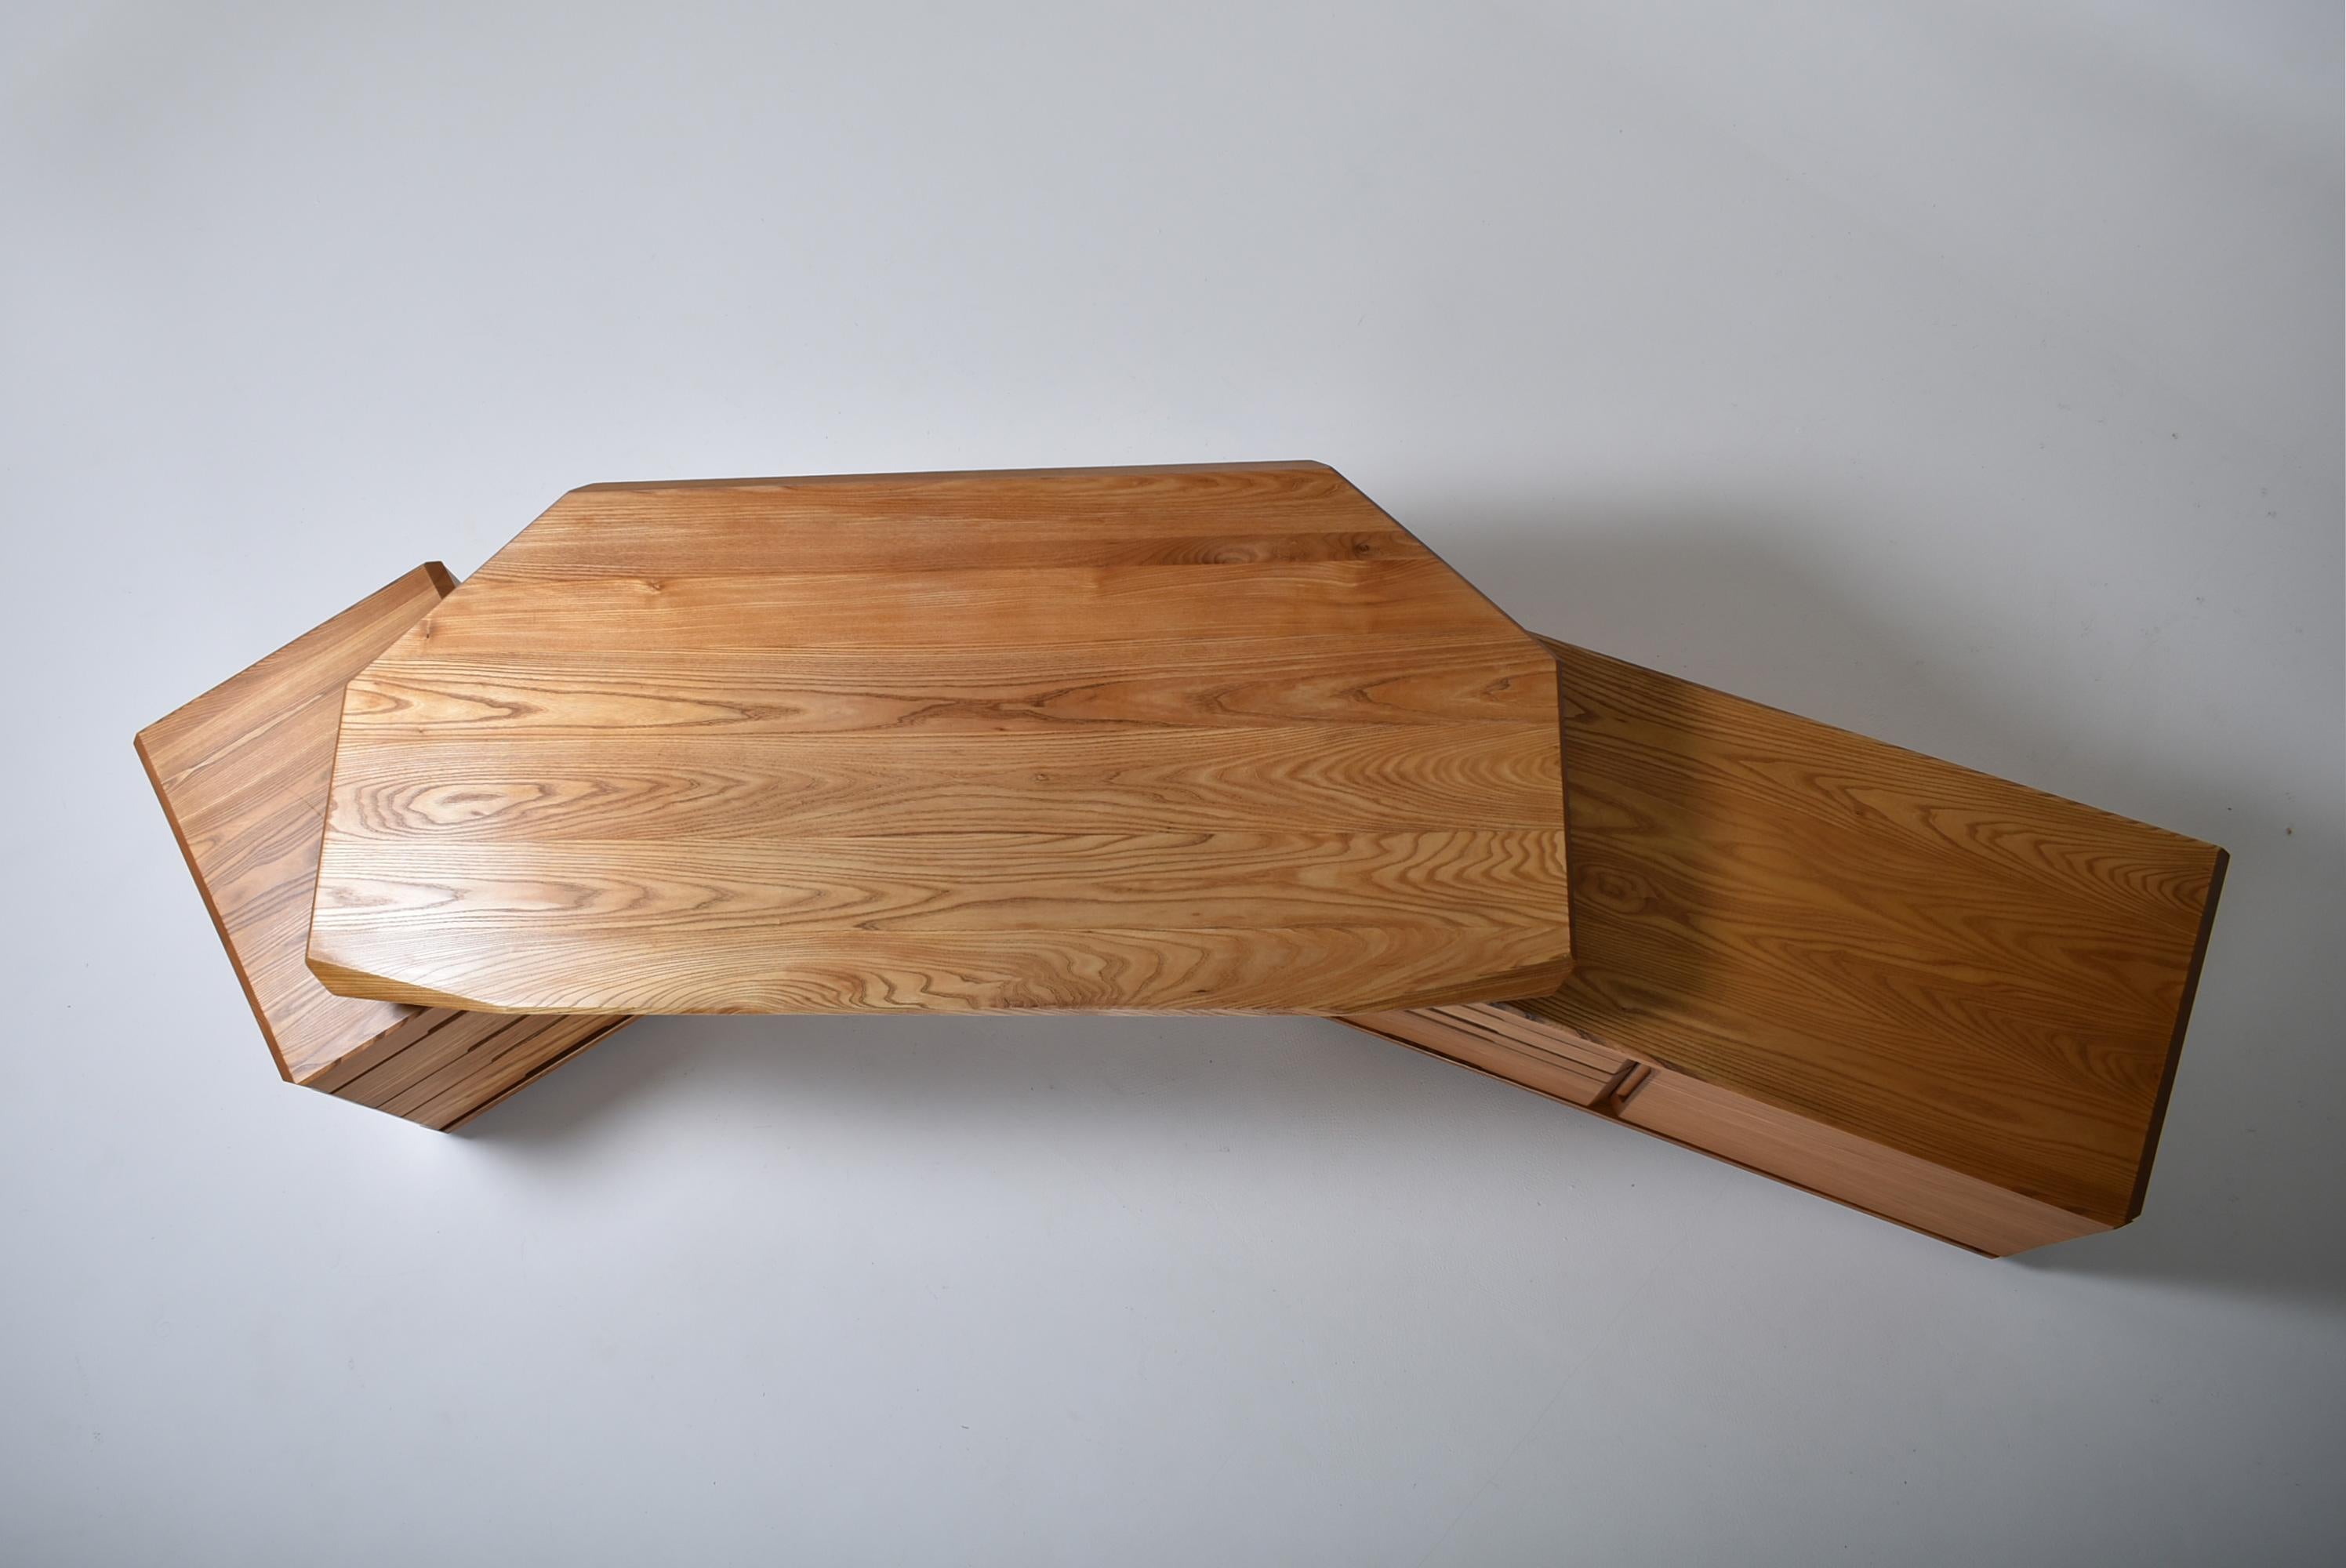 Late 20th Century Mid-Century Modern Solid Elm Desk B 40 by Pierre Chapo, France, 1980